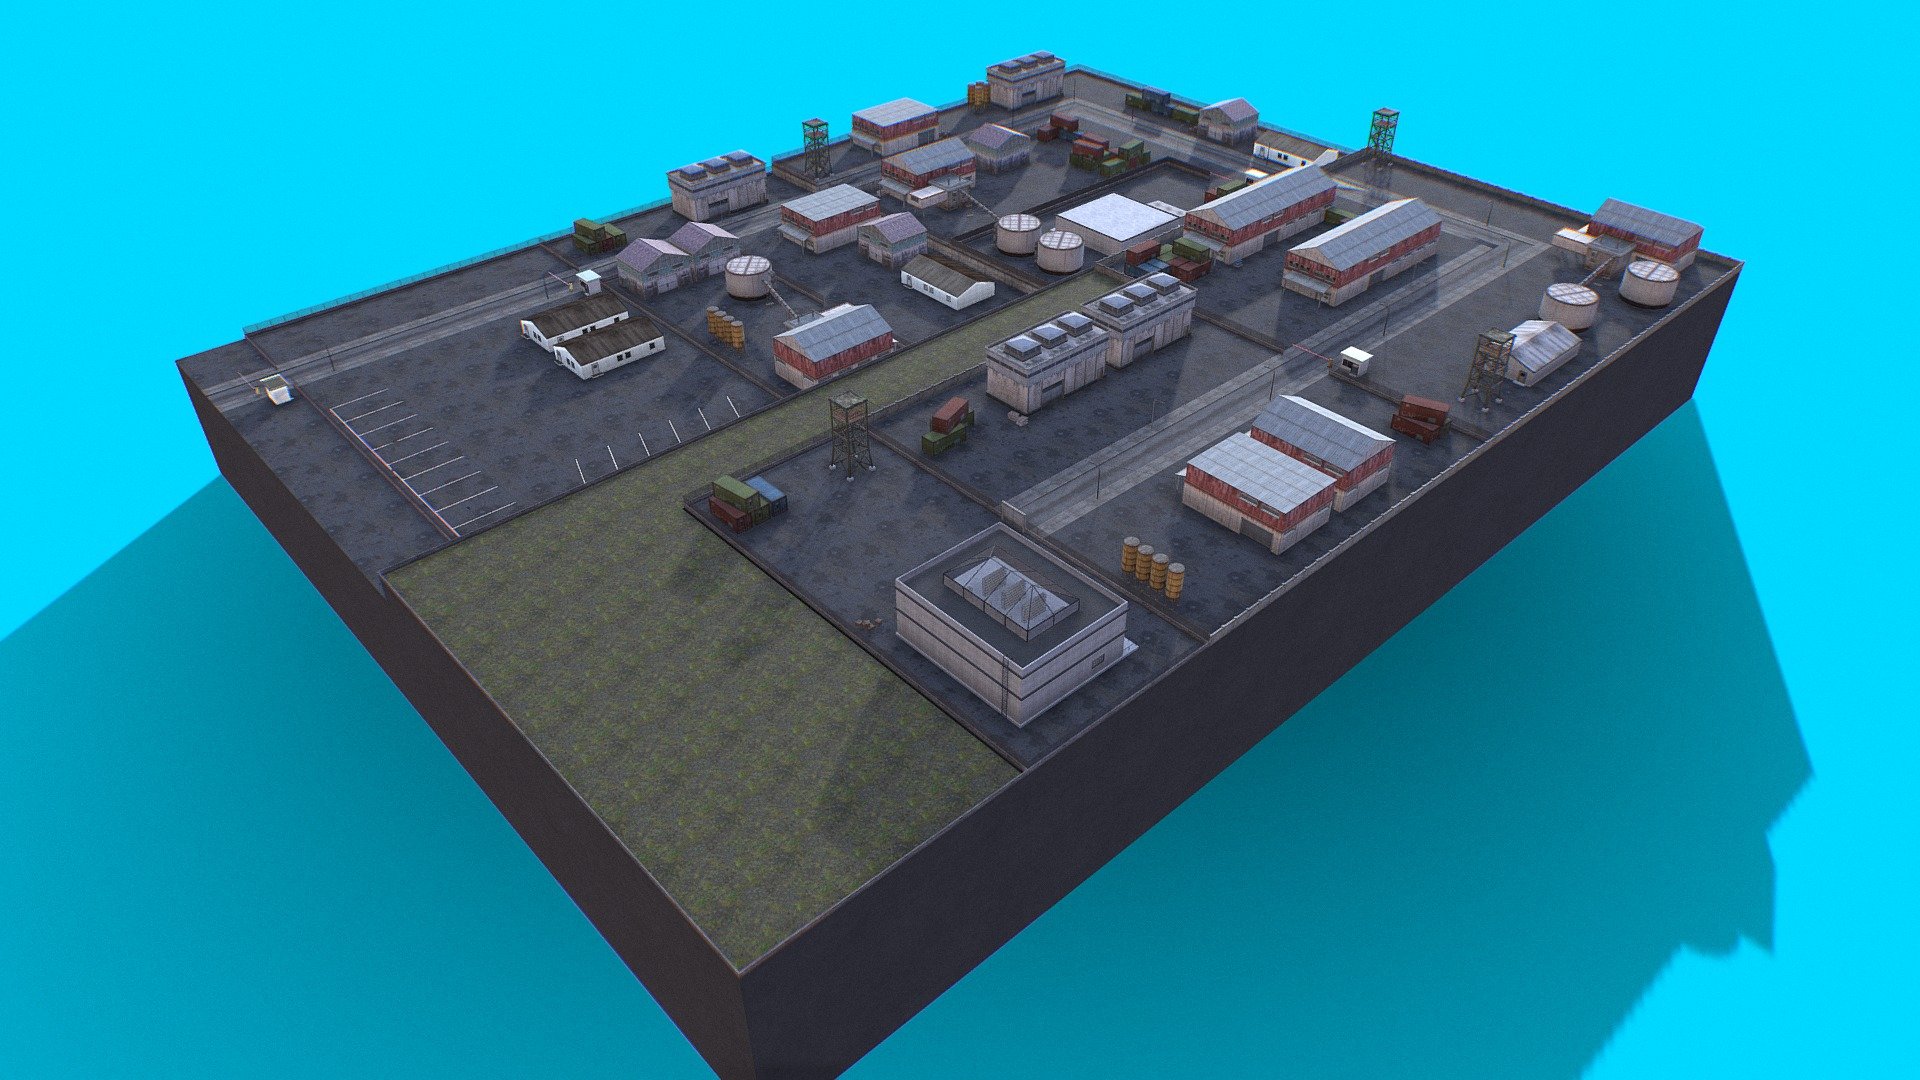 FPS Map for mobile game - Low Poly FPS Map 2 - 3D model by Asad.habib 3d model